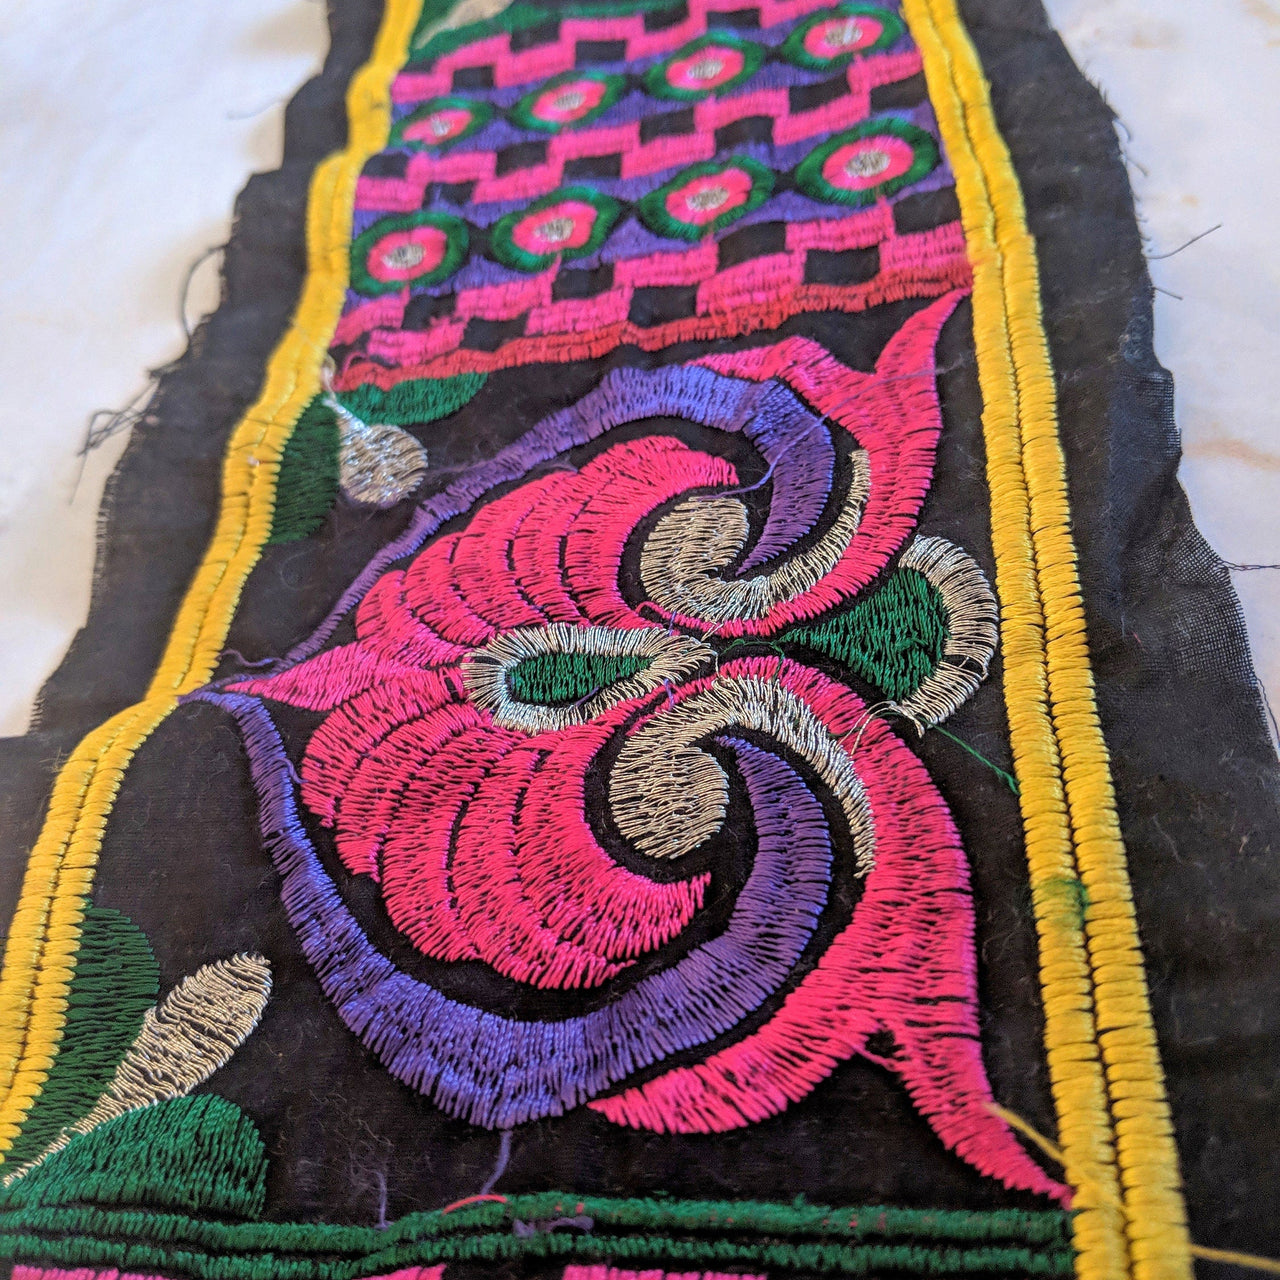 Black Fabric Lace With Embroidery In Pink, Purple, Green